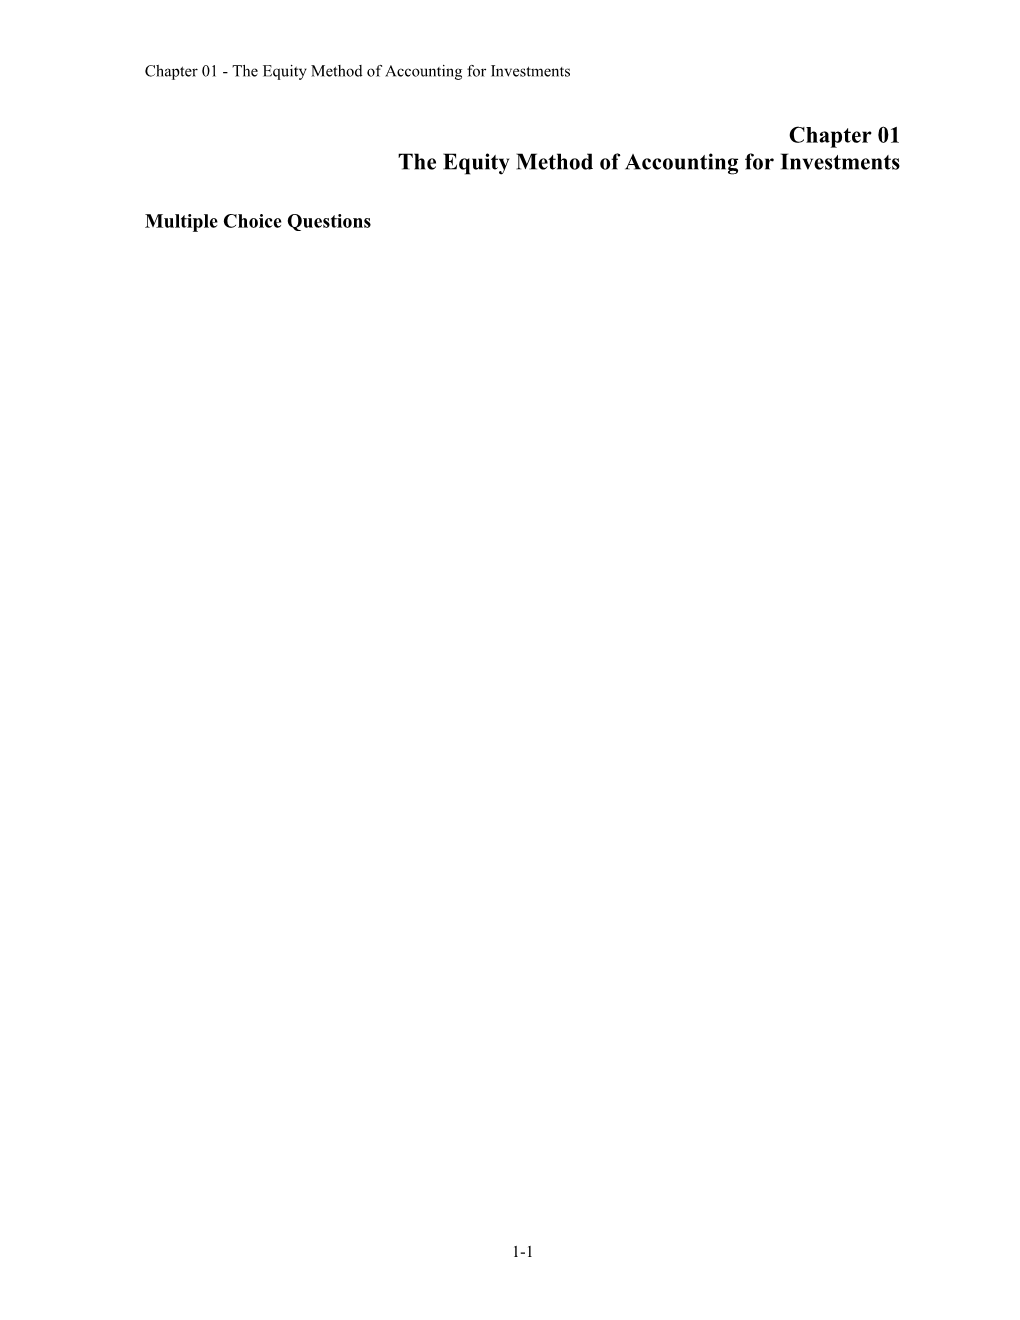 Chapter 01 the Equity Method of Accounting for Investments